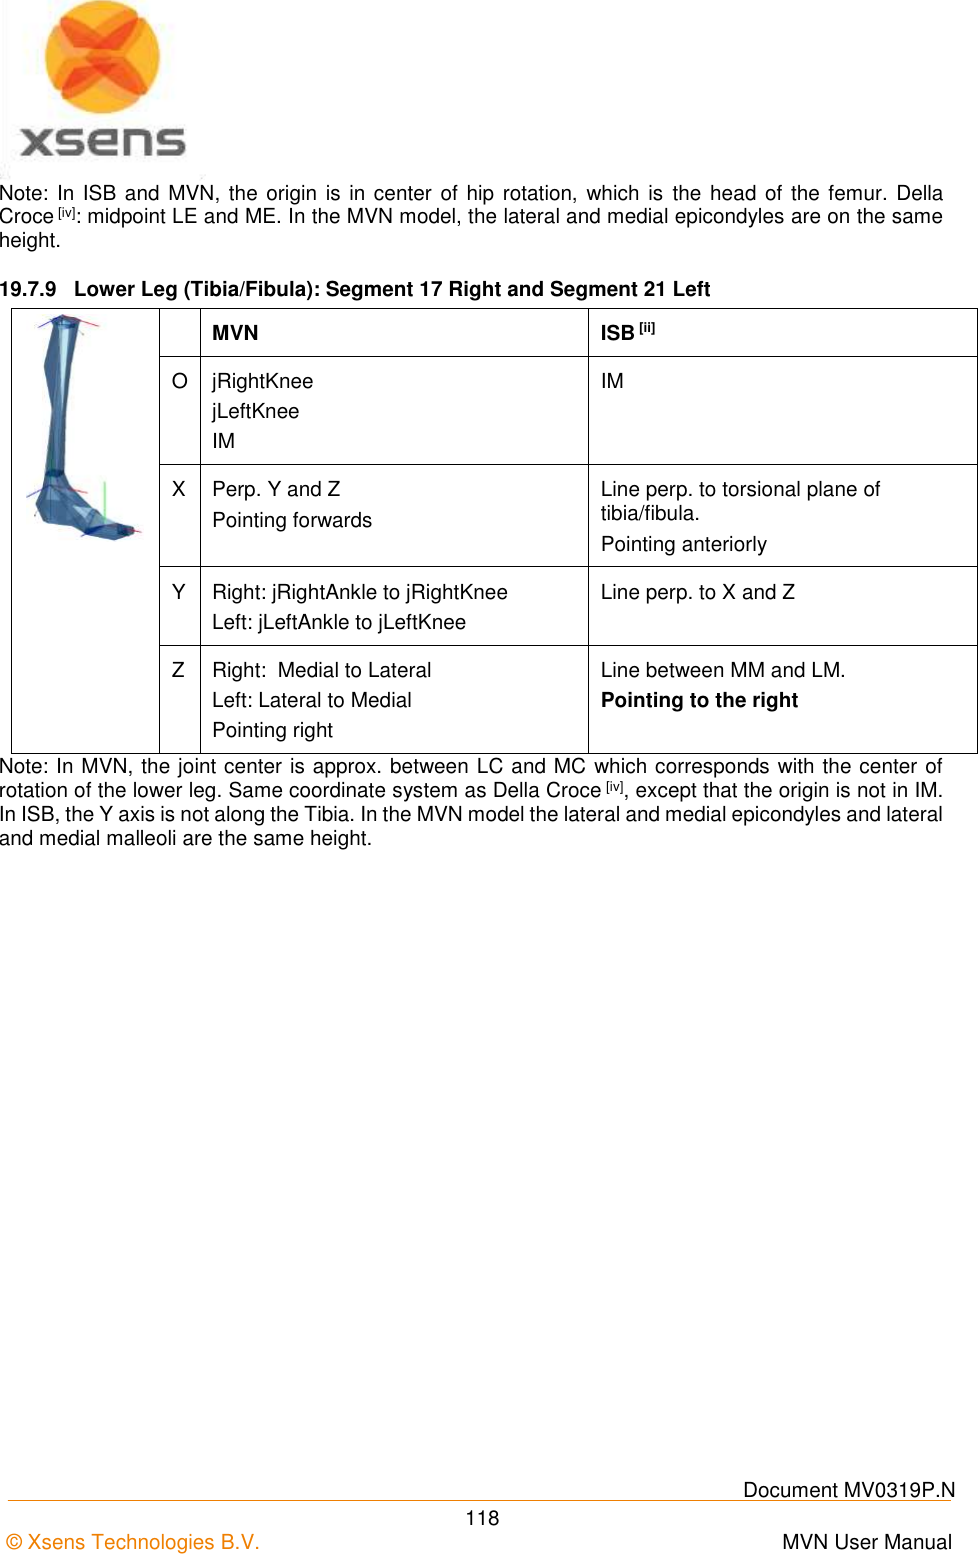    Document MV0319P.N © Xsens Technologies B.V.      MVN User Manual  118 Note: In ISB and  MVN, the origin is  in center  of hip rotation,  which is  the head of the femur.  Della Croce [iv]: midpoint LE and ME. In the MVN model, the lateral and medial epicondyles are on the same height. 19.7.9  Lower Leg (Tibia/Fibula): Segment 17 Right and Segment 21 Left   MVN  ISB [ii] O jRightKnee jLeftKnee IM IM X Perp. Y and Z Pointing forwards Line perp. to torsional plane of tibia/fibula. Pointing anteriorly Y Right: jRightAnkle to jRightKnee Left: jLeftAnkle to jLeftKnee Line perp. to X and Z Z Right:  Medial to Lateral Left: Lateral to Medial Pointing right Line between MM and LM. Pointing to the right Note: In MVN, the joint center is approx. between LC and MC which corresponds with the center of rotation of the lower leg. Same coordinate system as Della Croce [iv], except that the origin is not in IM. In ISB, the Y axis is not along the Tibia. In the MVN model the lateral and medial epicondyles and lateral and medial malleoli are the same height. 